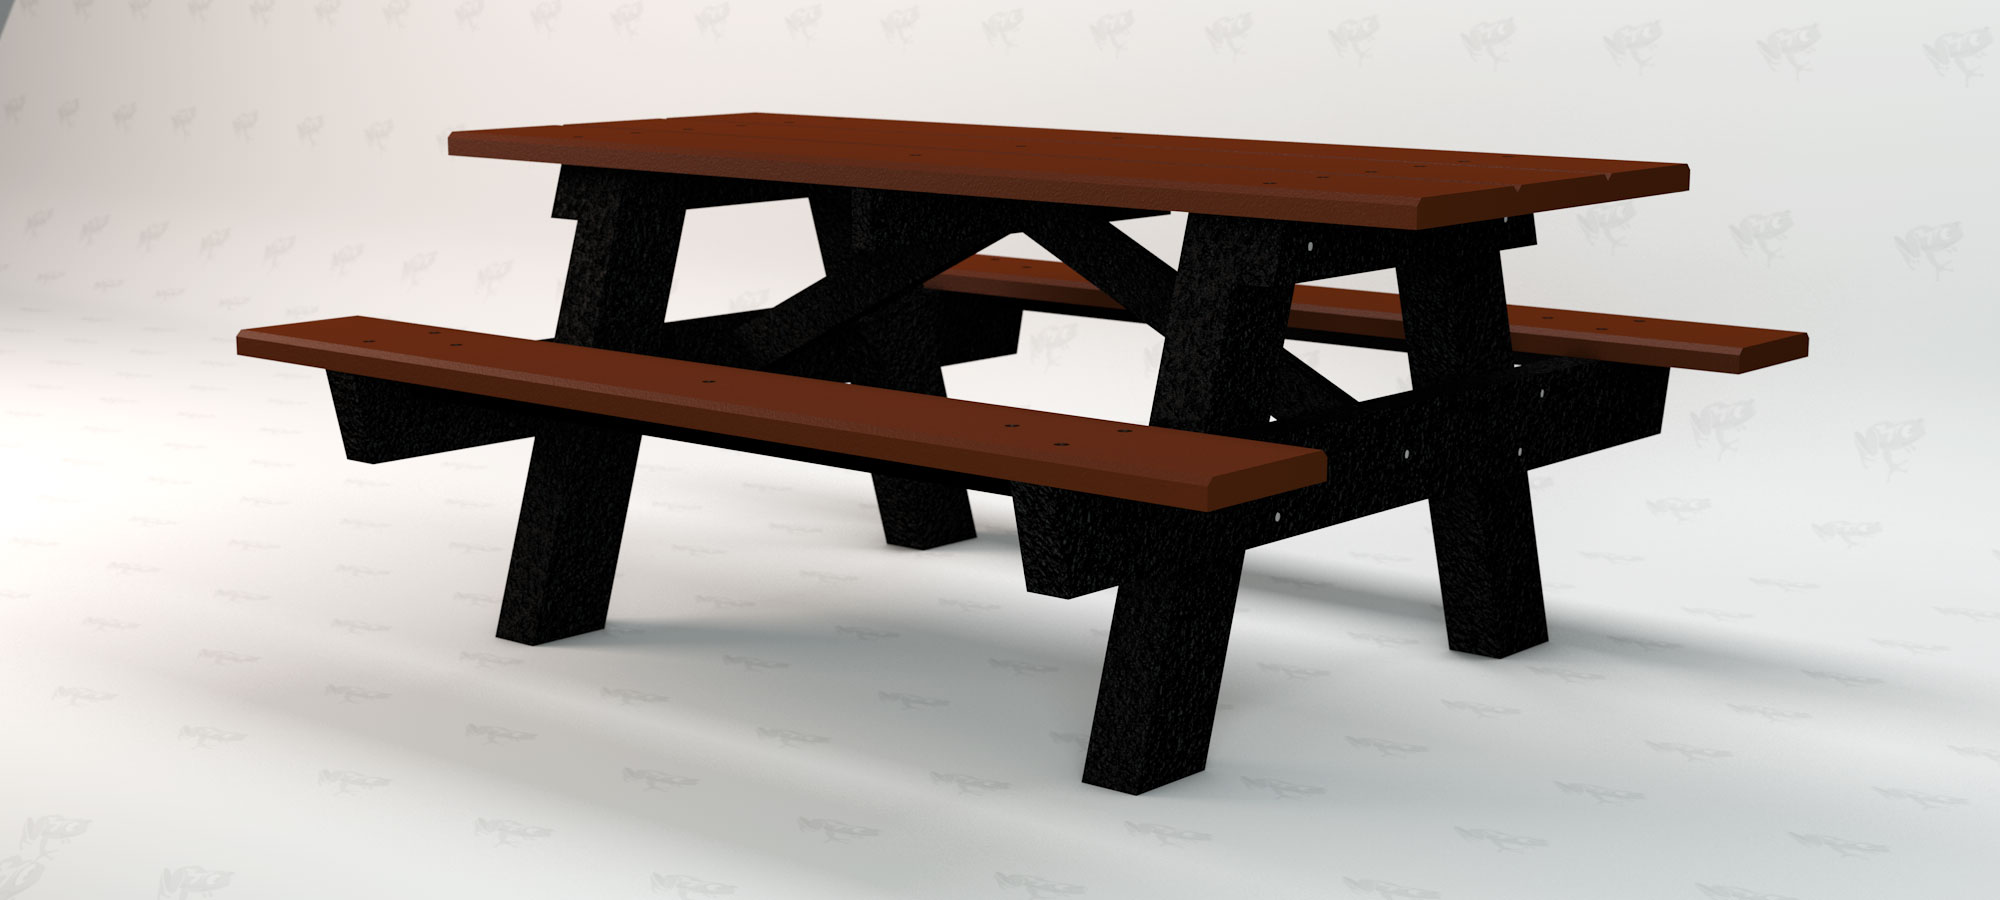 A Frame Table Right